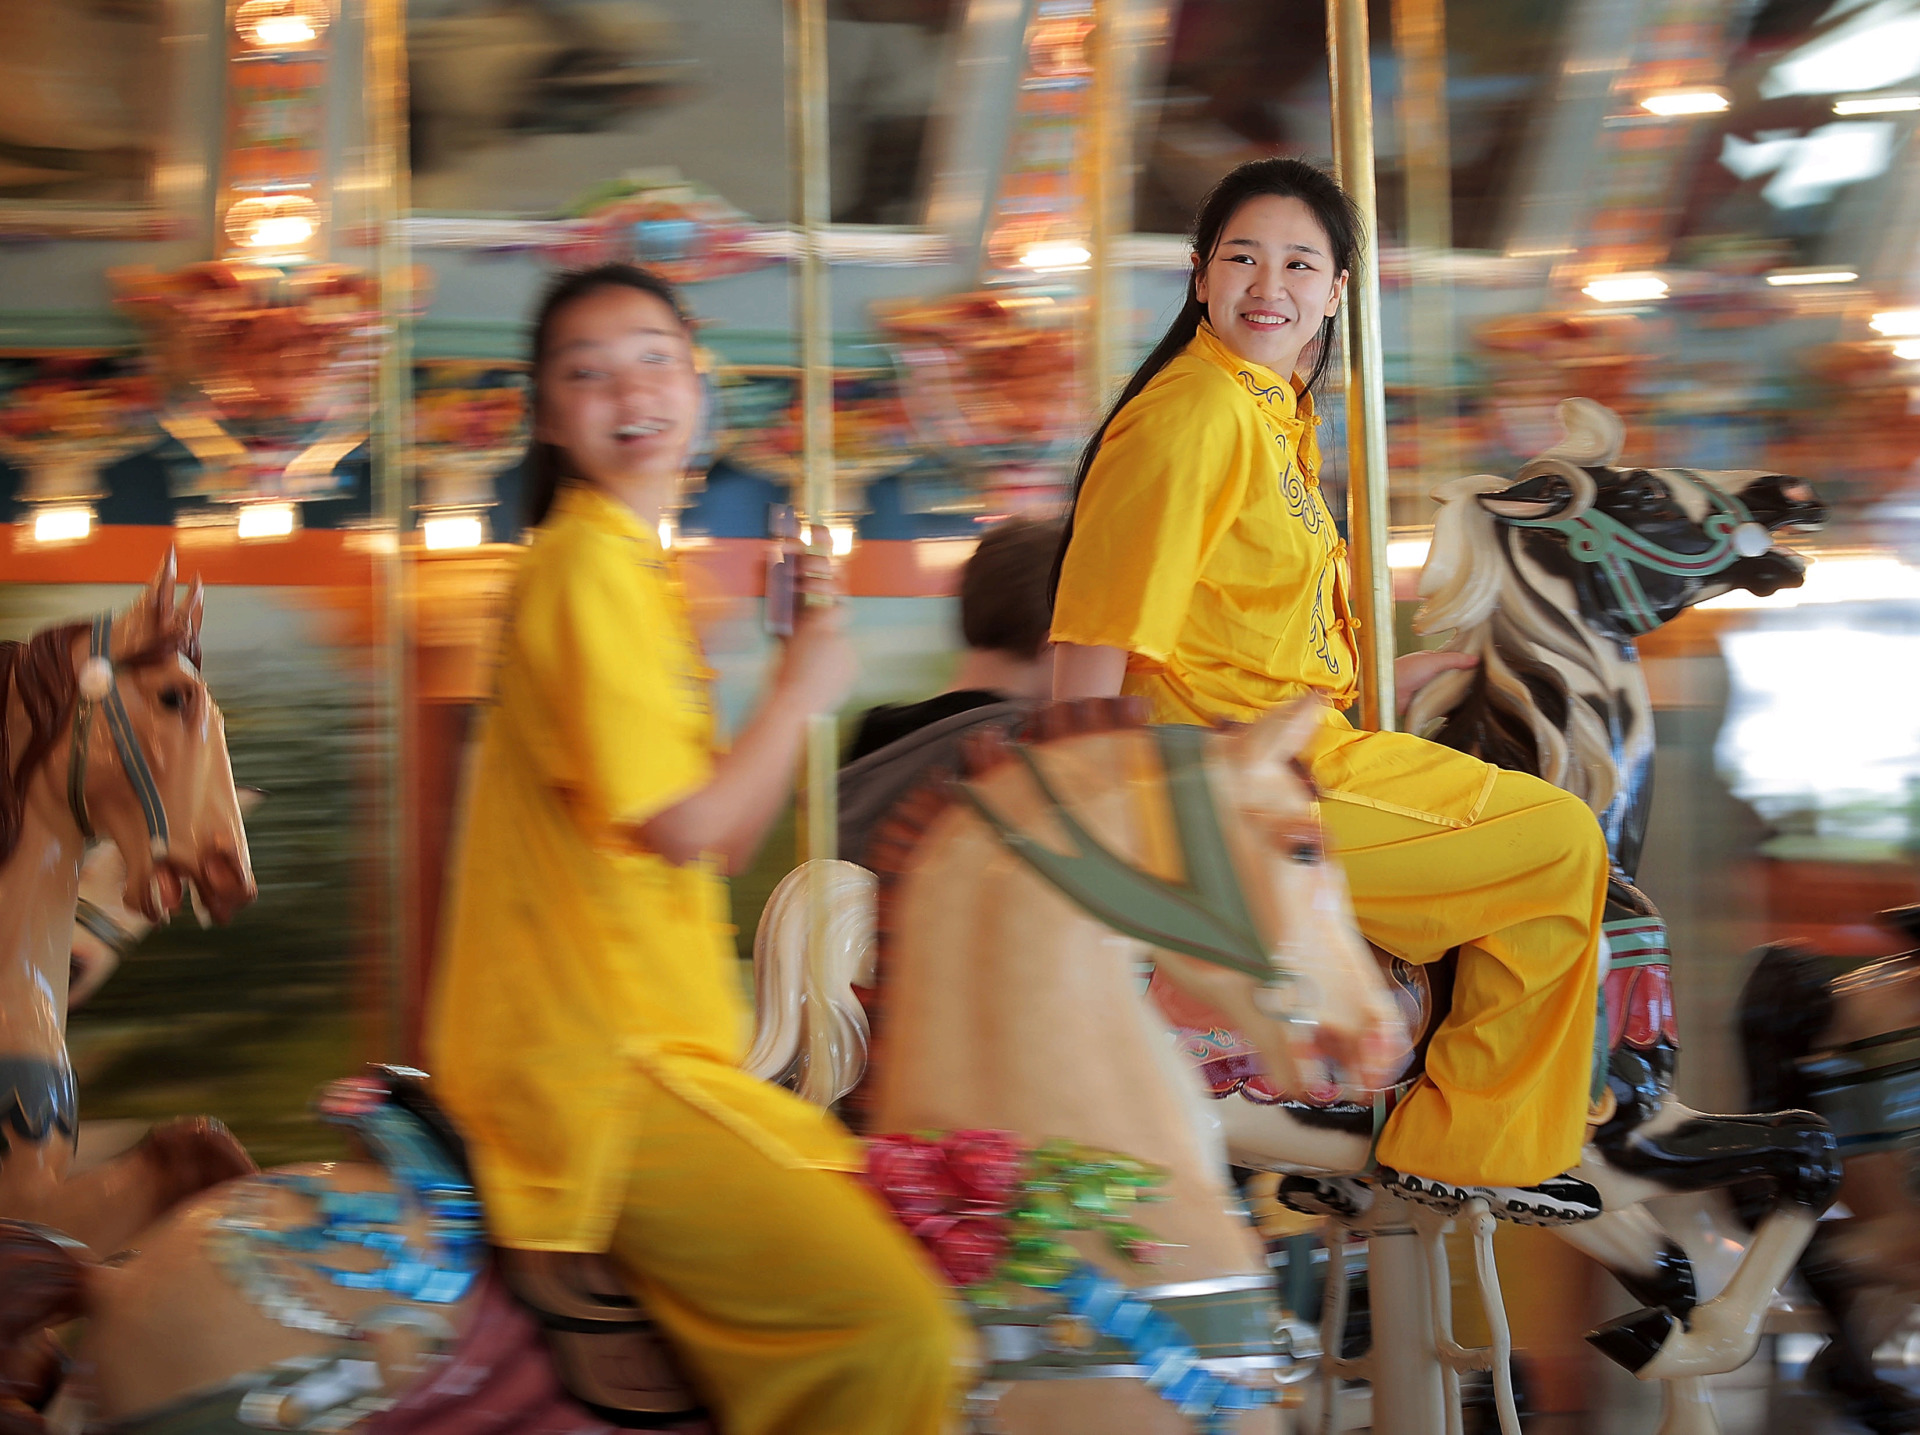 <strong>University of Memphis students Zhinen Guo (left) and Zhuoqun Rao ride the merry-go-round during a Chinese New Year celebration conducted by the Confucius Institute at the Children's Museum of Memphis on Saturday, Feb. 2. The Confucius Institute at the University of Memphis, which was founded more than 12 years ago, conducts community cultural outreach programs in Memphis with dance, crafts and martial arts demonstrations at schools, libraries and international festivals.</strong> (Jim Weber/Daily Memphian)